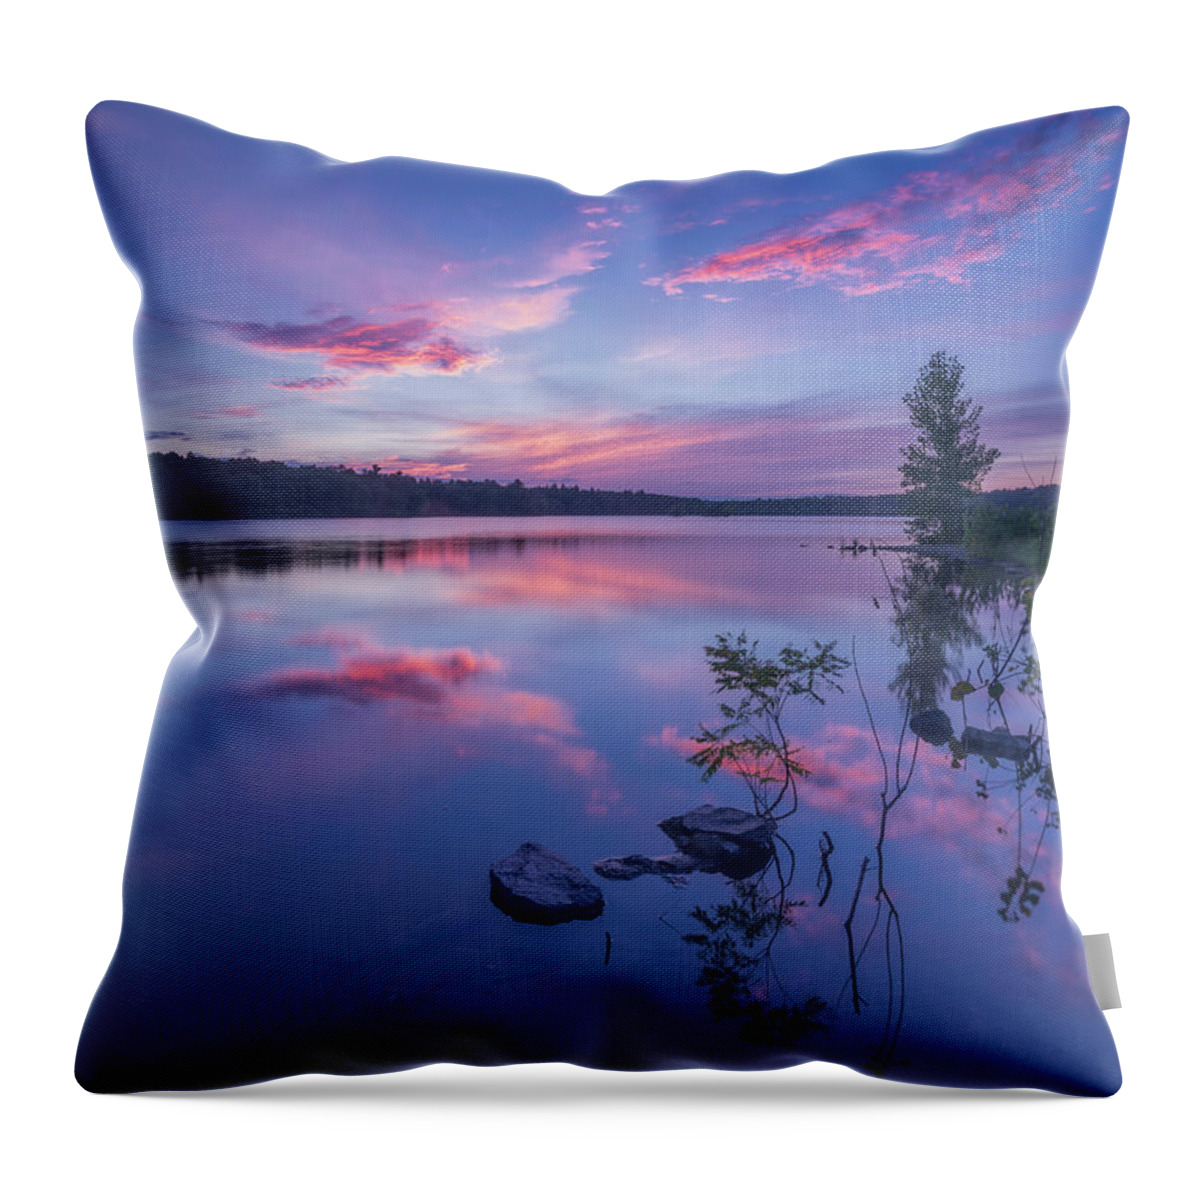 Horn Pond Throw Pillow featuring the photograph Horn Pond Sunset by Rob Davies